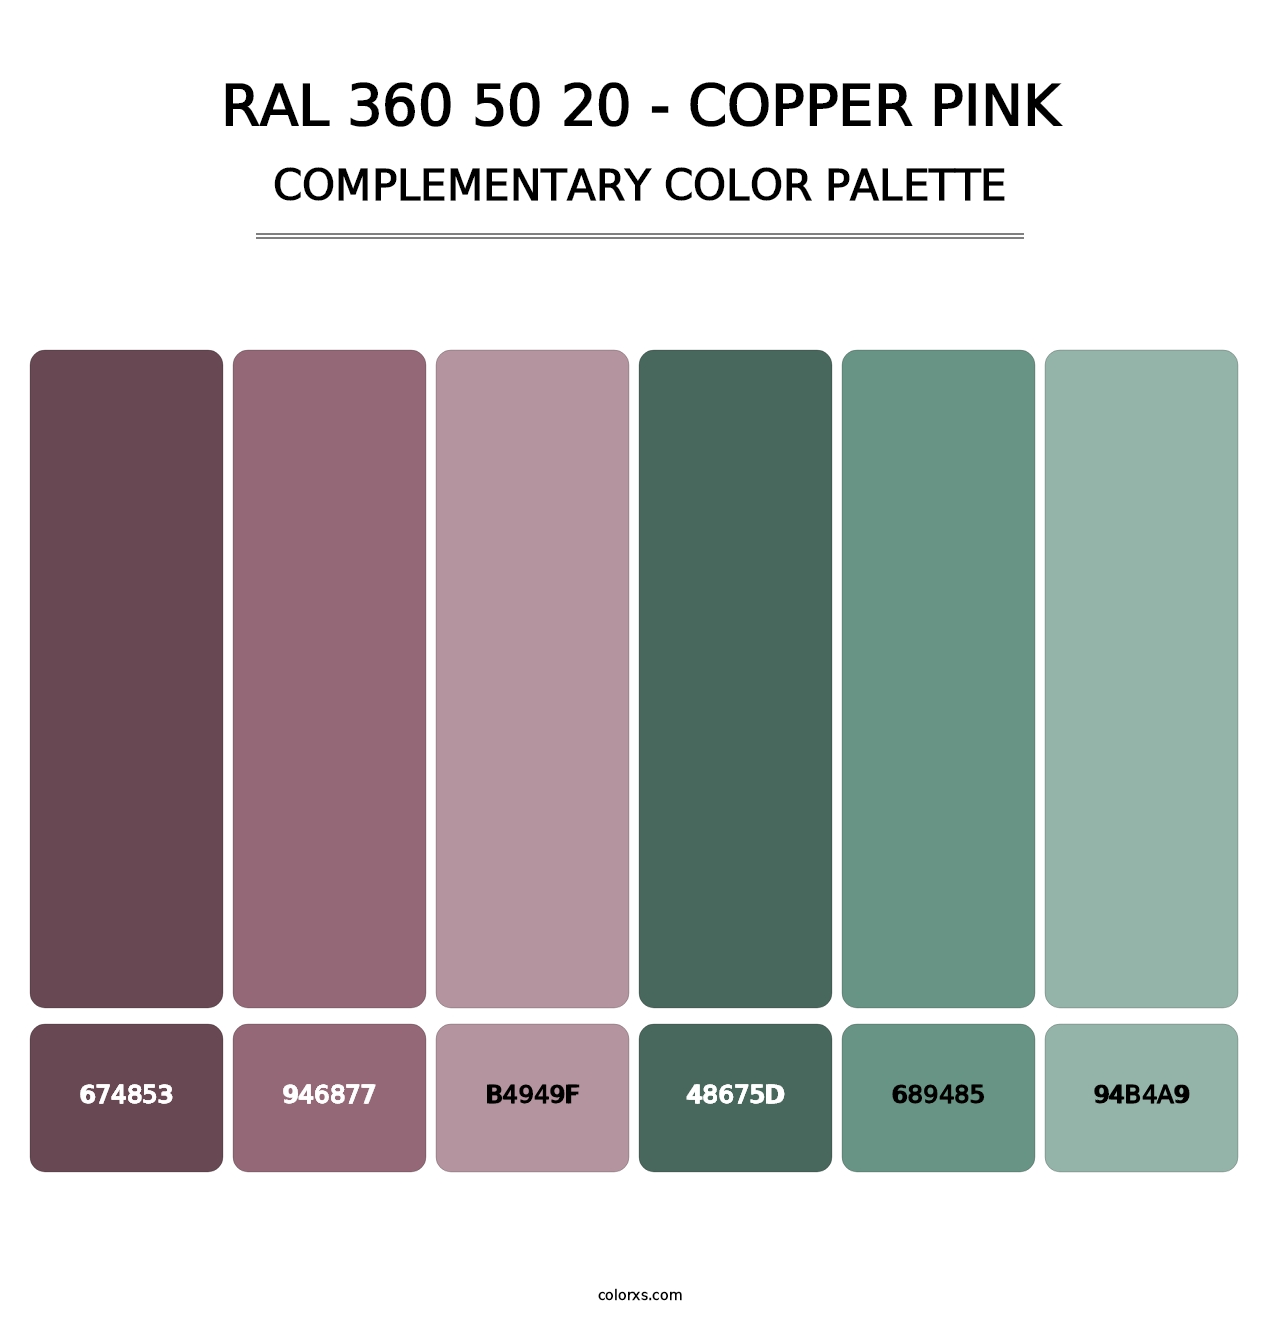 RAL 360 50 20 - Copper Pink - Complementary Color Palette